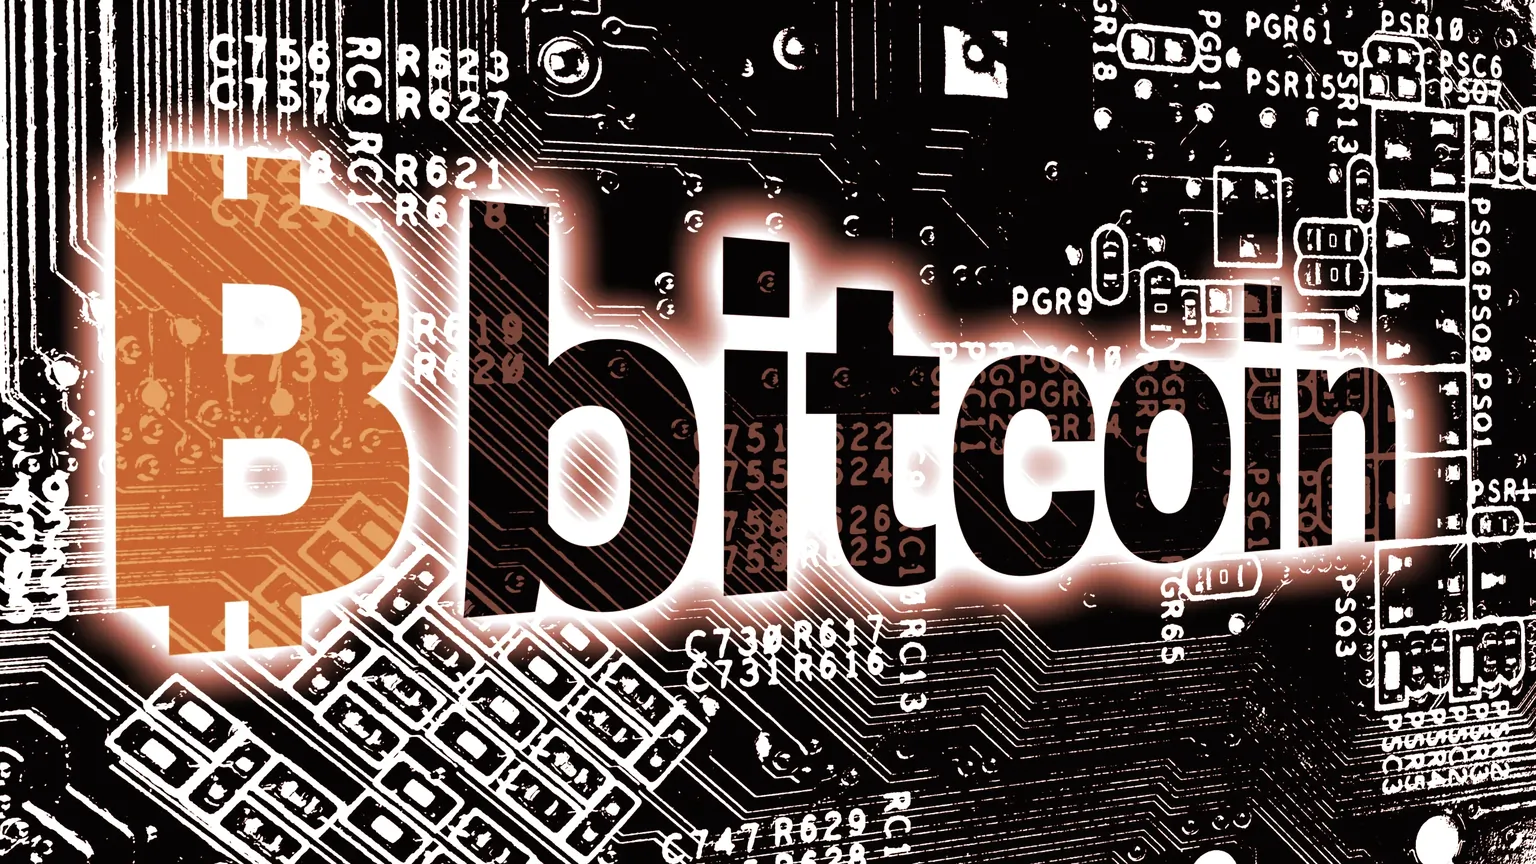 Bitcoin's open source software runs on hundreds of thousands of computers concurrently. Image: Shutterstock